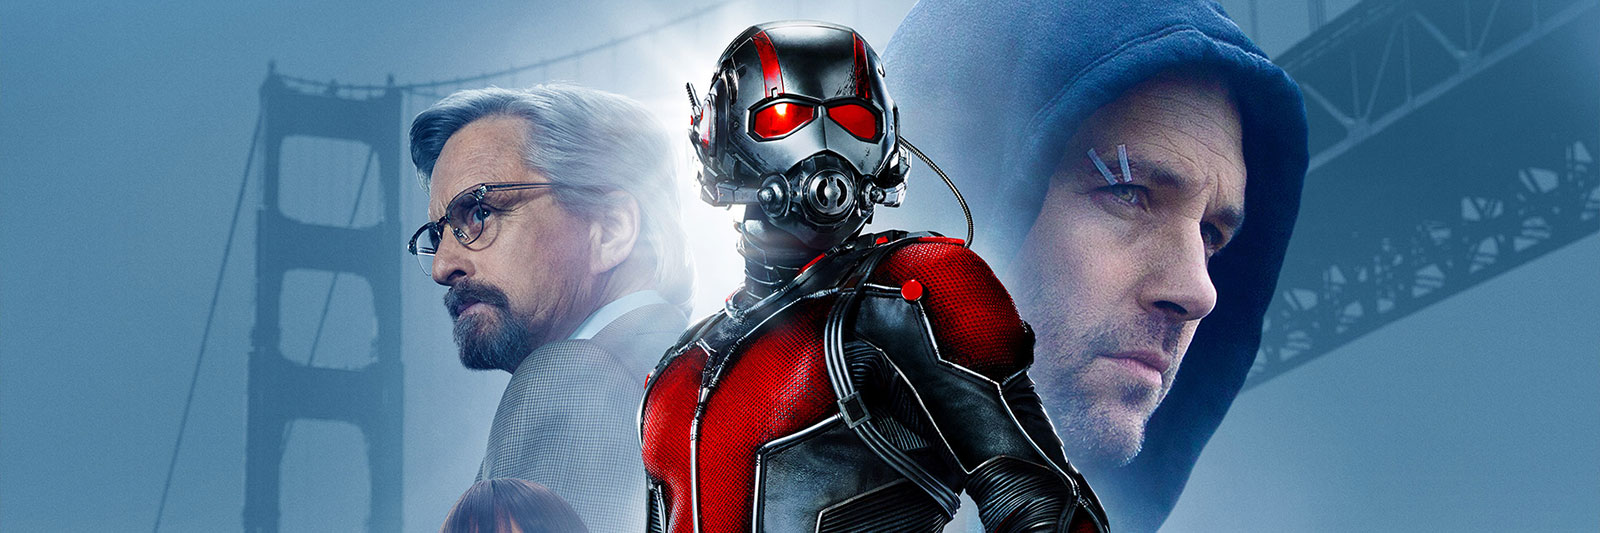 movie poster for ant-man movie